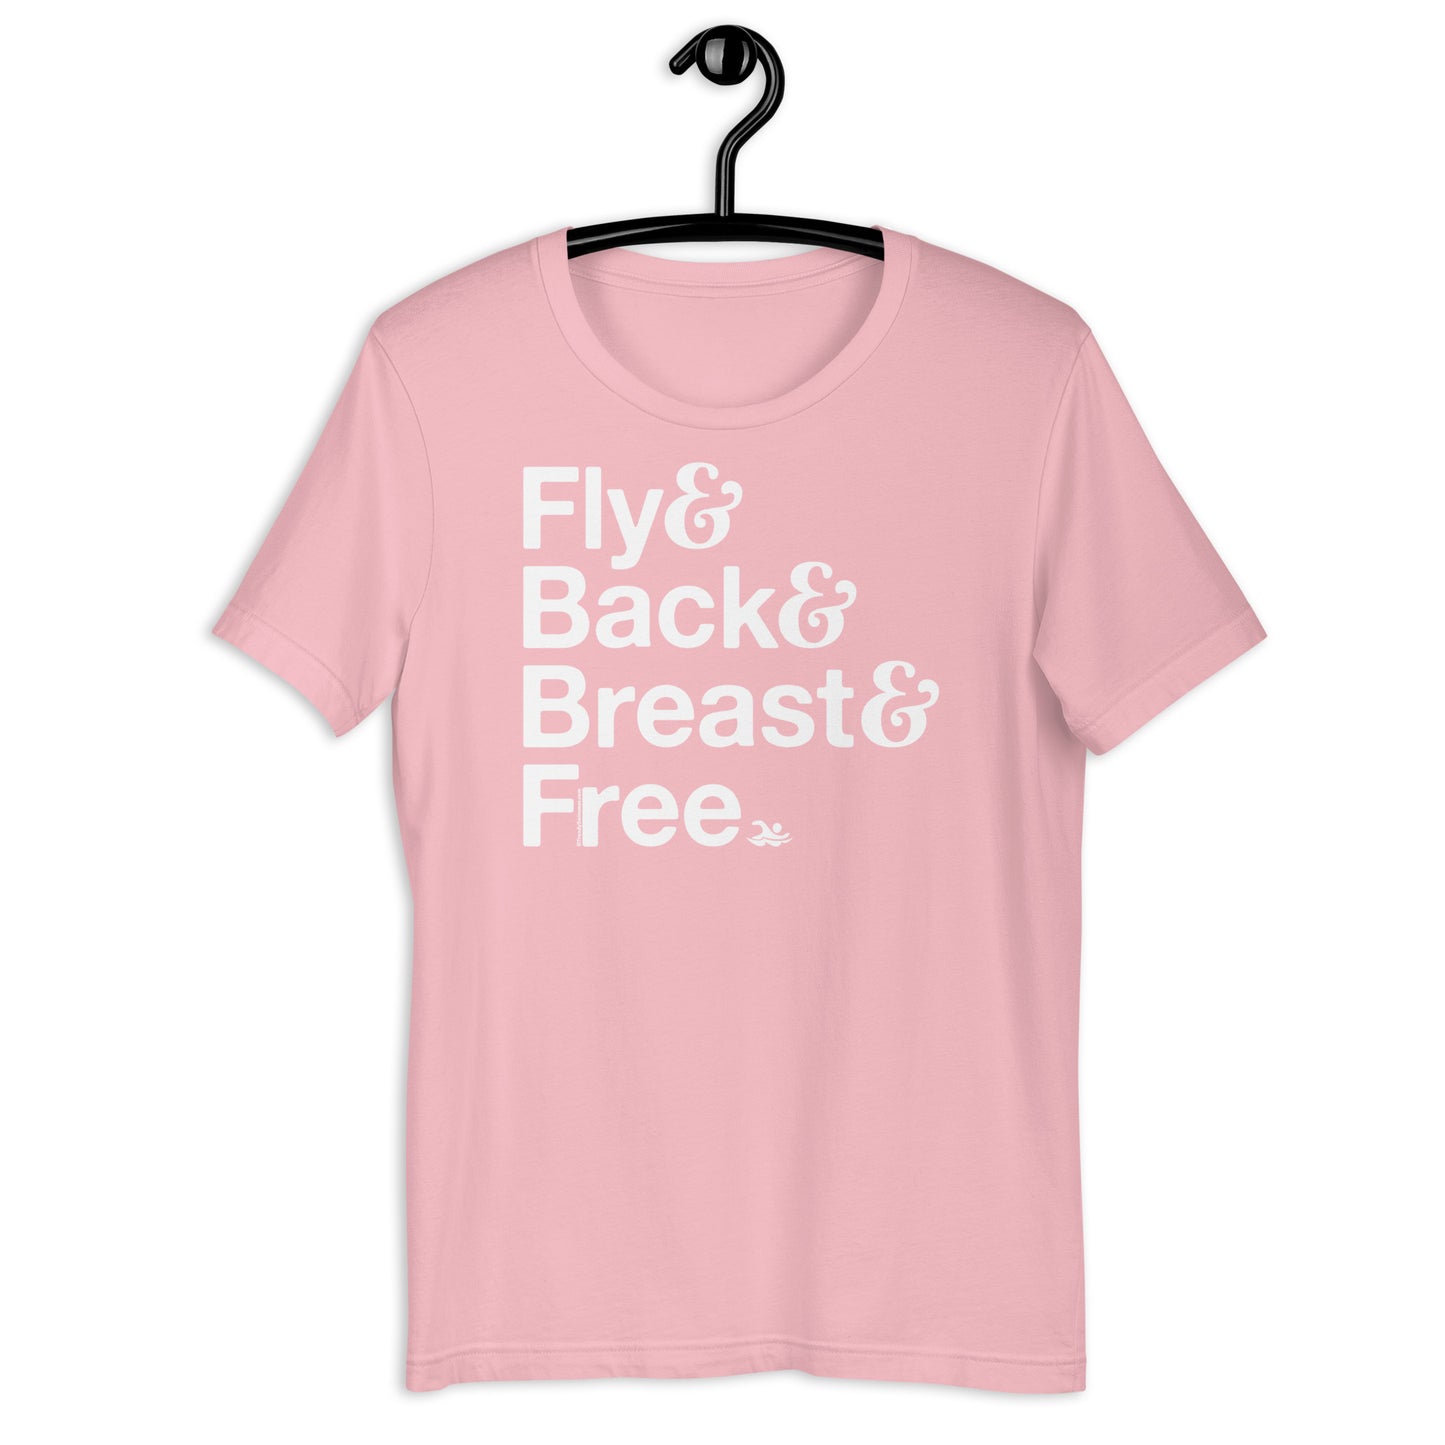 Fly Back Breast and Free IM Premium T-shirt